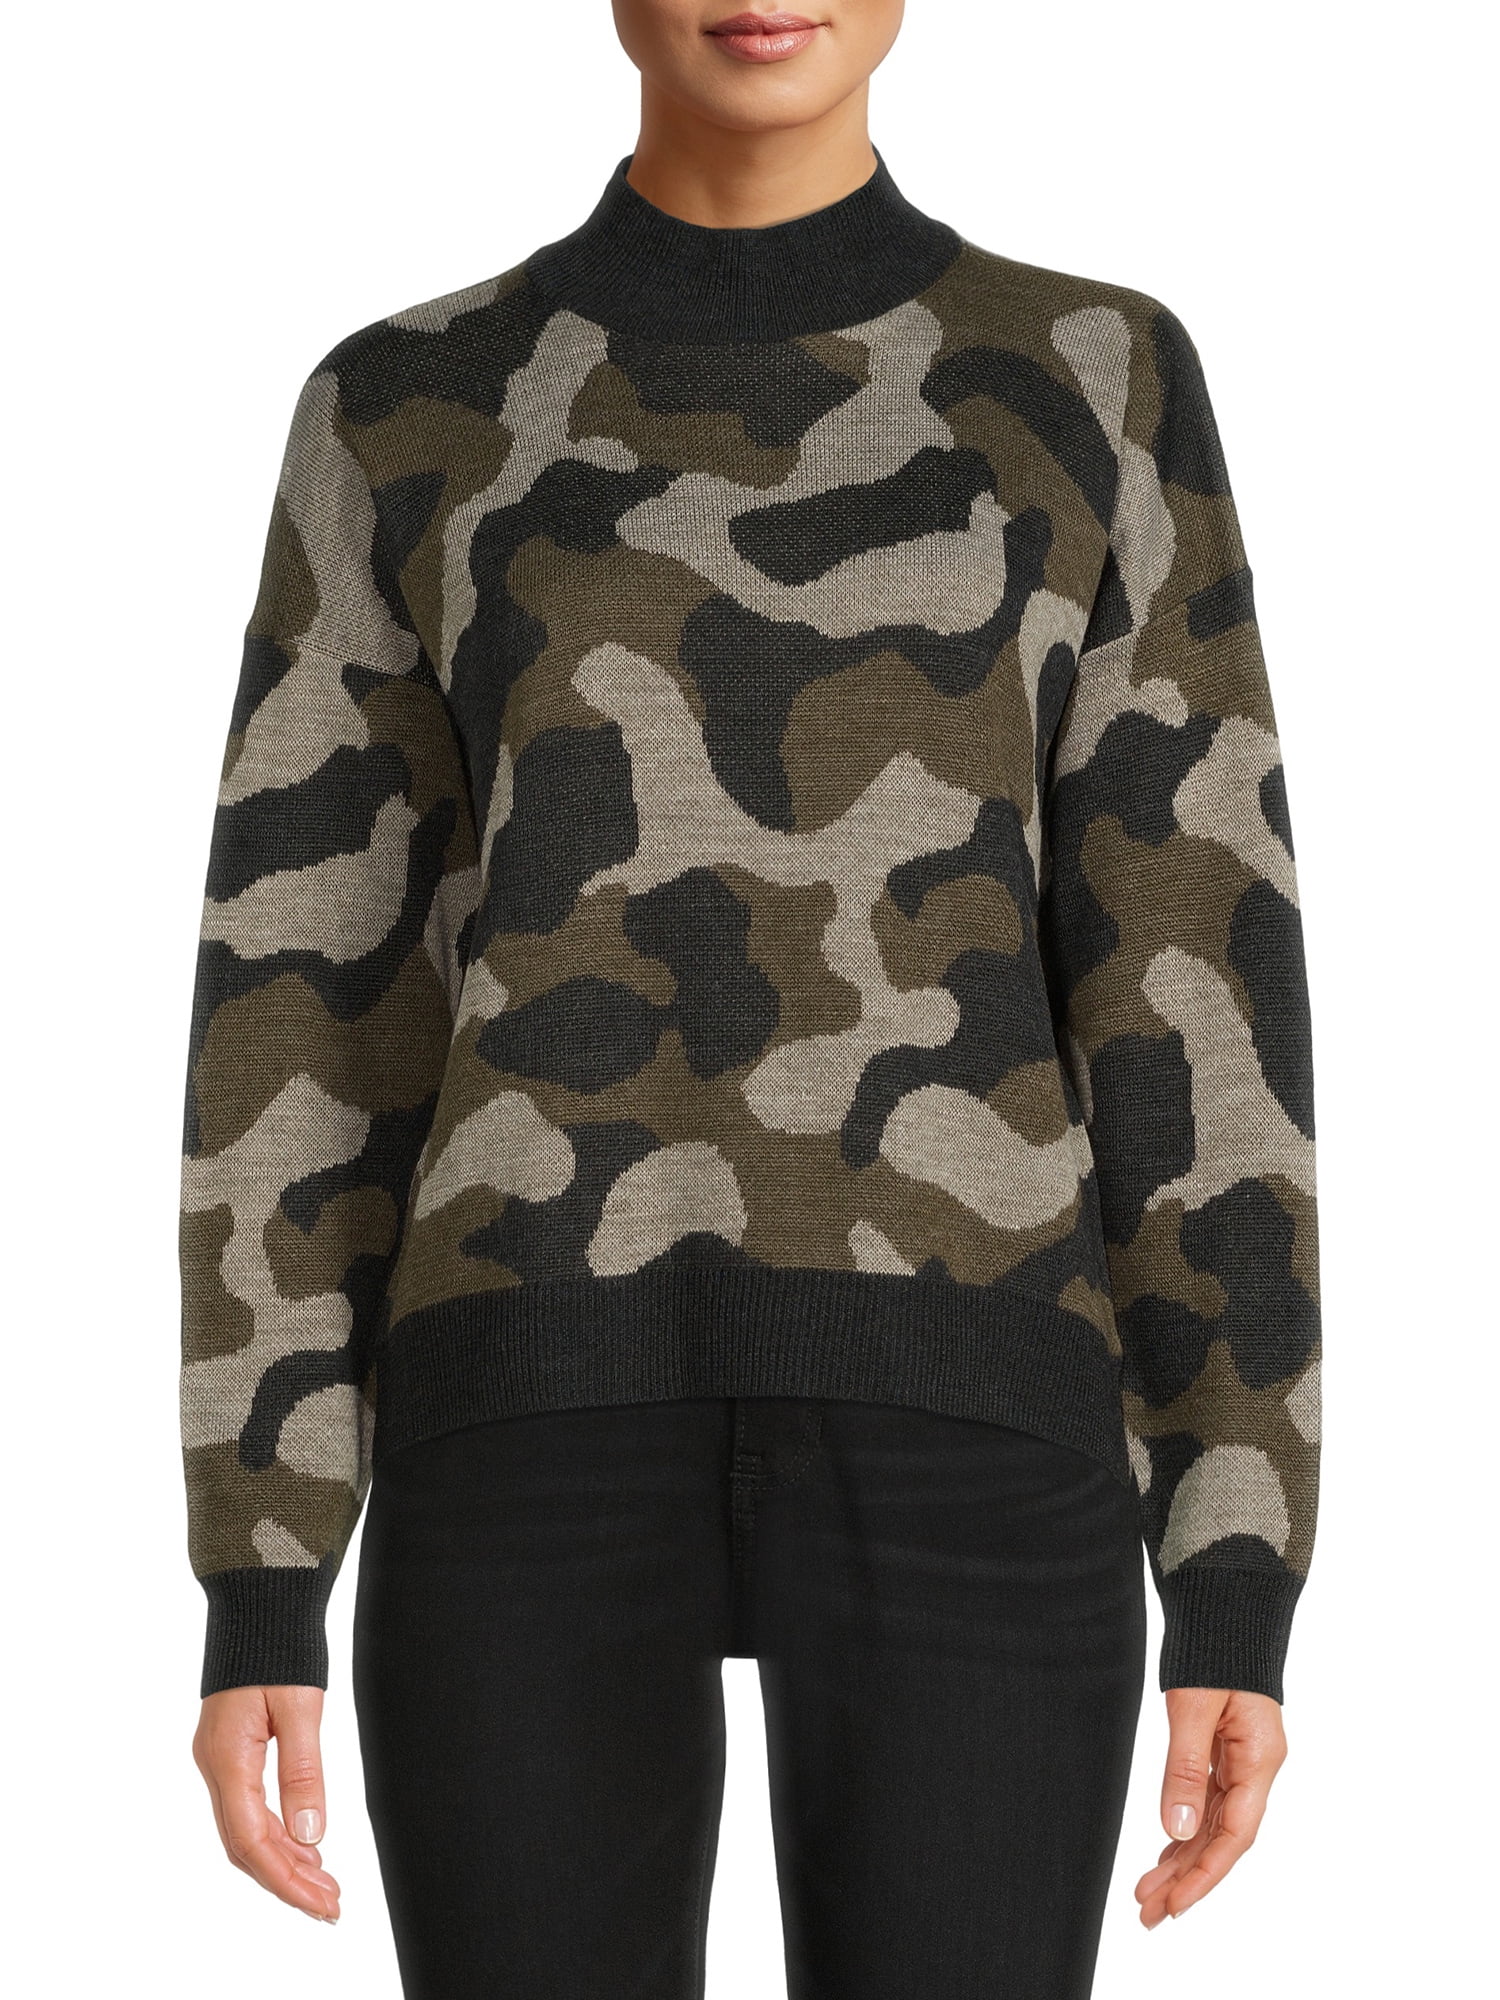 Gocgt Mens Camouflage Printed Fashion Turtle Neck Knit Pullover Long-Sleeve Sweaters